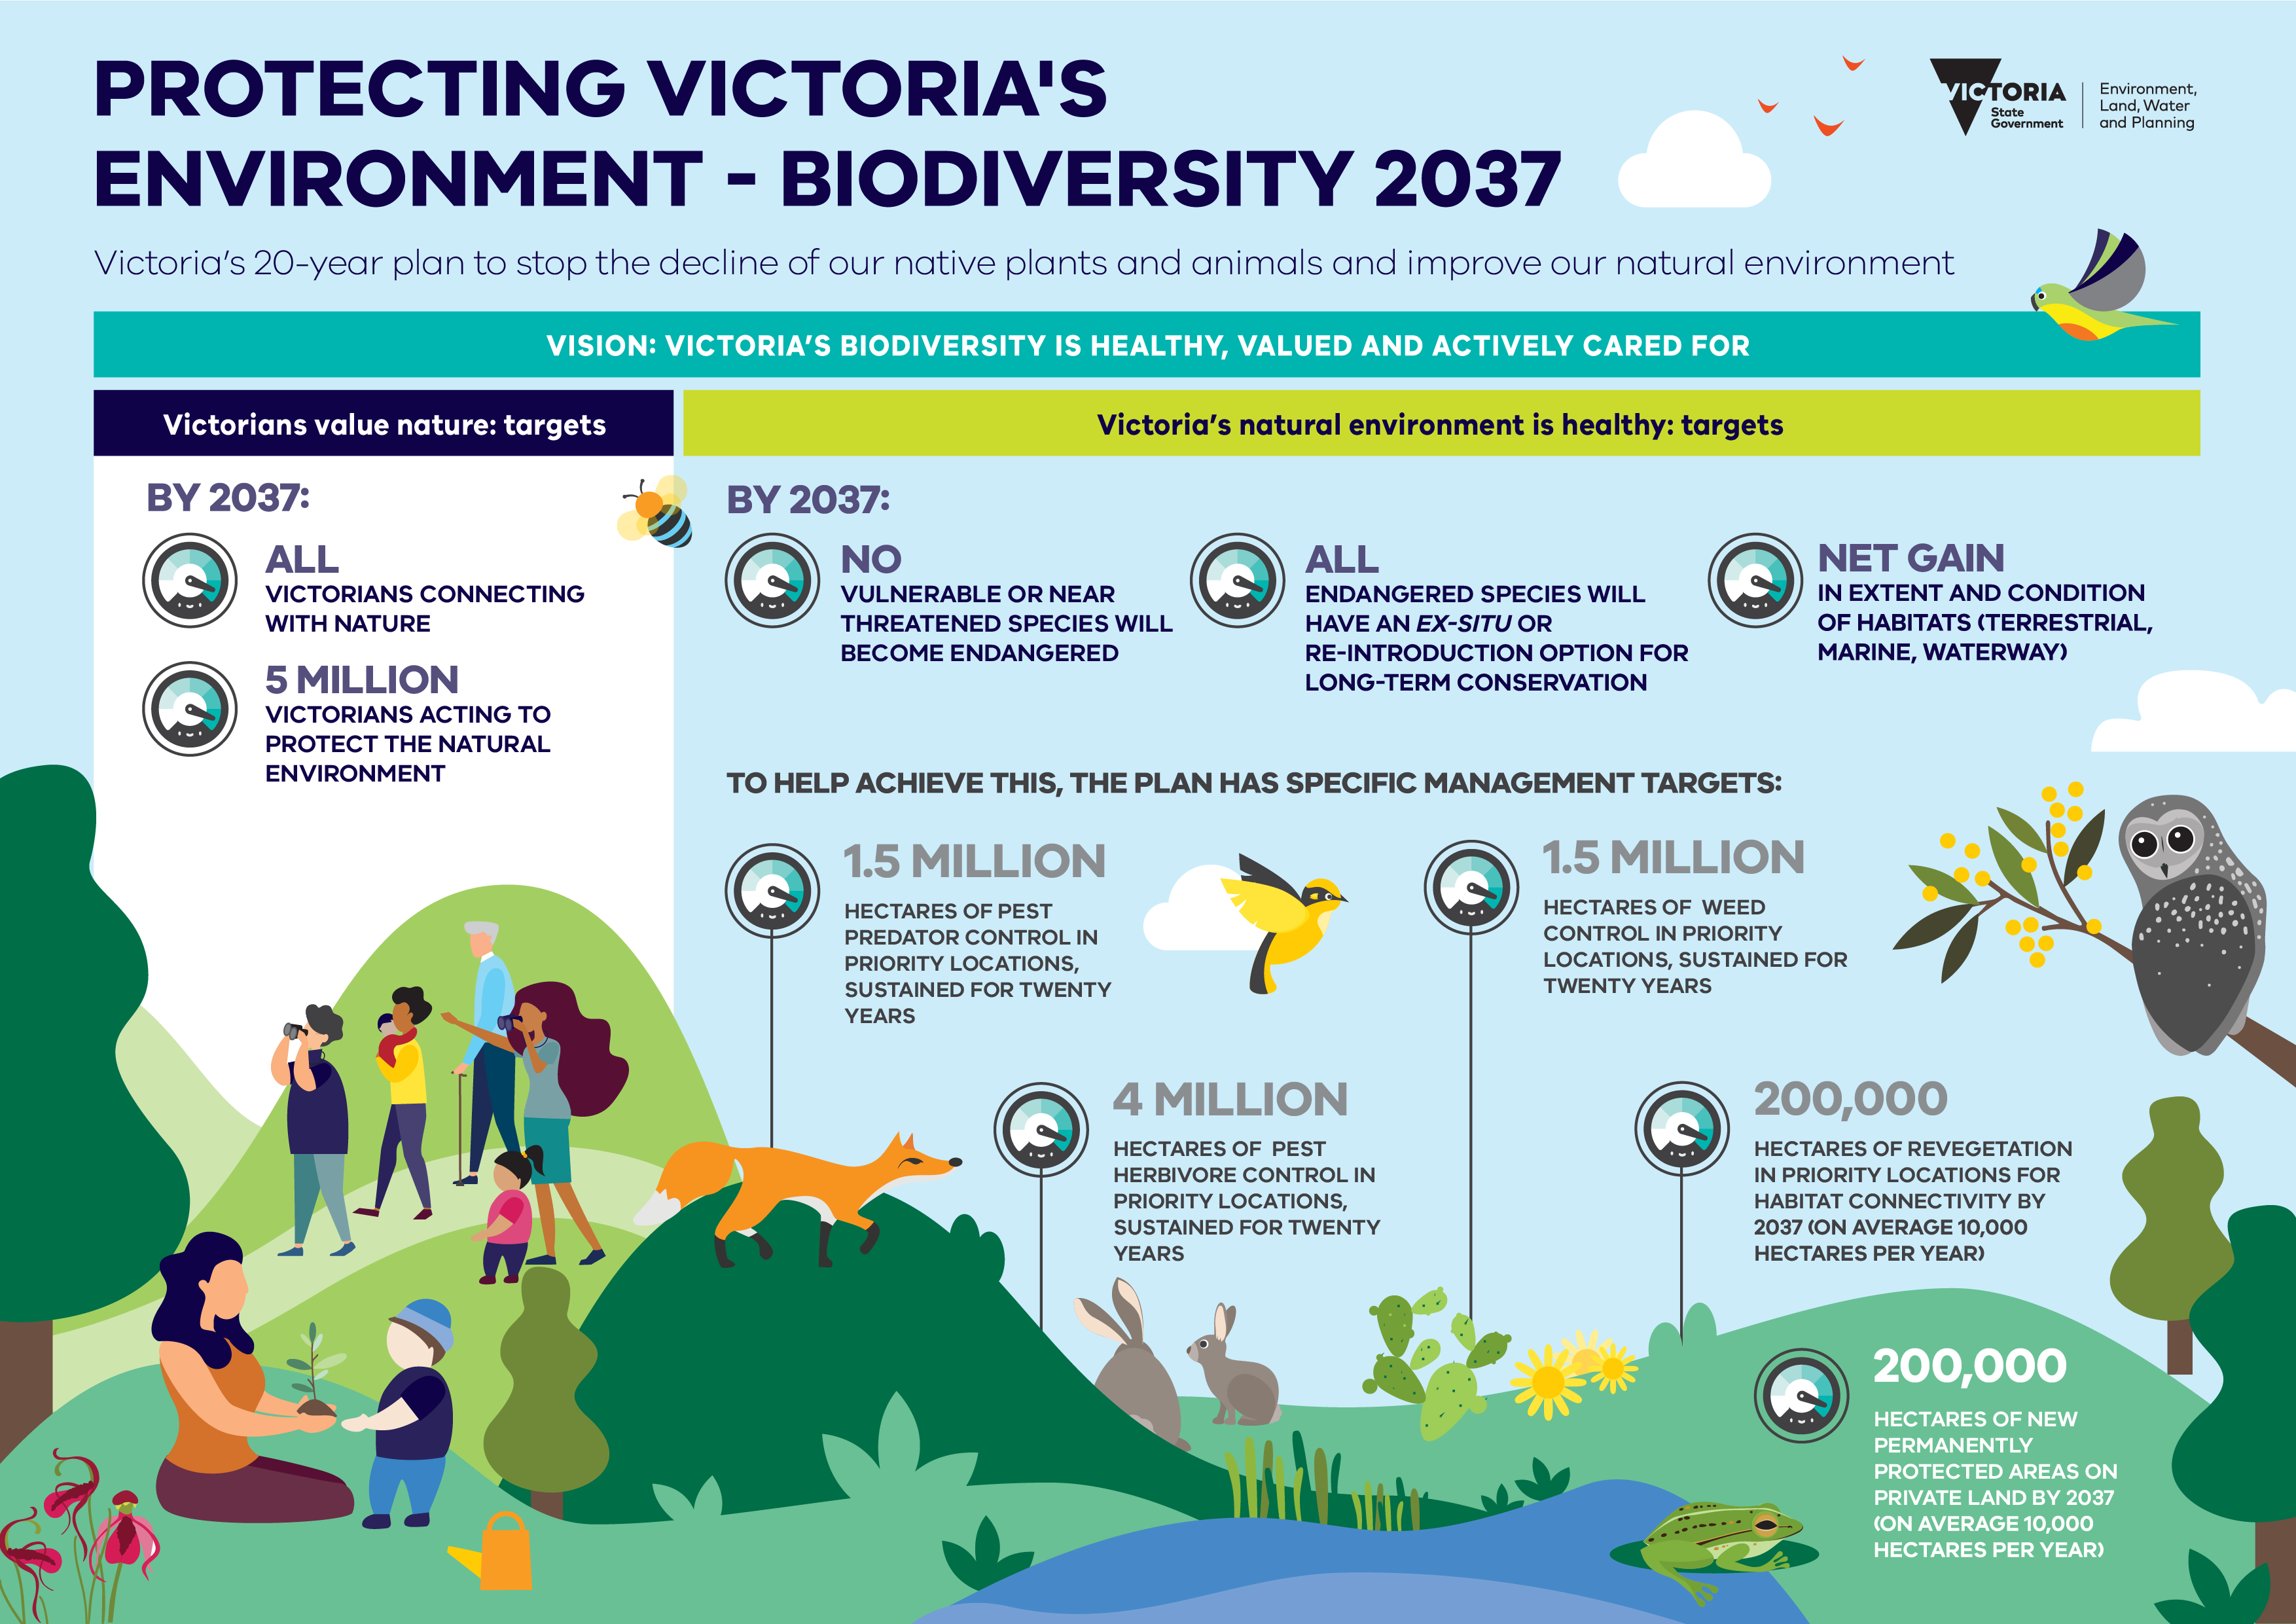 This infographic describes the Department of Environment, Land, Water, and Planning’s (DELWP) original targets in the Protecting Victoria's Environment - Biodiversity 2037 Plan. It features a header with the text ‘Protecting Victoria’s Environment - Biodiversity 2037 Victoria’s 20-year plan to stop the decline of our native plants and animals and improve our natural environment’. Below this title is the text ‘Vision: Victoria’s biodiversity is healthy, valued and actively cared for’.  It has the DELWP Victorian Government logo in the top right corner. The infographic features several designed graphics of animals, plants, landscapes, and many people. It also features invasive species such as foxes, rabbits, and prickly pear cacti.  Under the title are two columns that show the Biodiversity 2037 Plan targets with corresponding graphical icons, they include the following:  Victorians Value Nature: targets  By 2037:  *First icon with text next to it stating ‘All Victorians connecting with nature’  *Second icon with text next to it stating ‘5 million Victorians acting to protect the natural environment’  Victoria’s natural environment is healthy: targets  By 2037:  *Third icon with text next to it stating ‘No vulnerable or near threatened species will become endangered’  *Fourth icon with text next to it stating ‘All endangered species will have an ex-situ or re-introduction option for long-term conservation’  *Fifth icon with text next to it stating ‘Net gain in extent and condition of habitats (terrestrial, marine, waterway)’  To help achieve this, the plan has specific management targets:  *Sixth icon with text next to it stating ‘1.5 million hectares of pest predator control in priority locations, sustained for twenty years’  *Seventh icon with text next to it stating ‘1.5 million hectares of weed control in priority locations, sustained for twenty years’  *Eighth icon with text next to it stating ‘4 million hectares of pest herbivore control in priority locations, sustained for twenty years’  *Ninth icon with text next to it stating ‘200,000 hectares of revegetation in priority locations for habitat connectivity by 2037 (on average 10,000 hectares per year)’  *Tenth icon with text next to it stating ‘200,000 hectares of new permanently protected areas on private land by 2037 (on average 10,000 hectares per year)’  That is the end of the infographic.